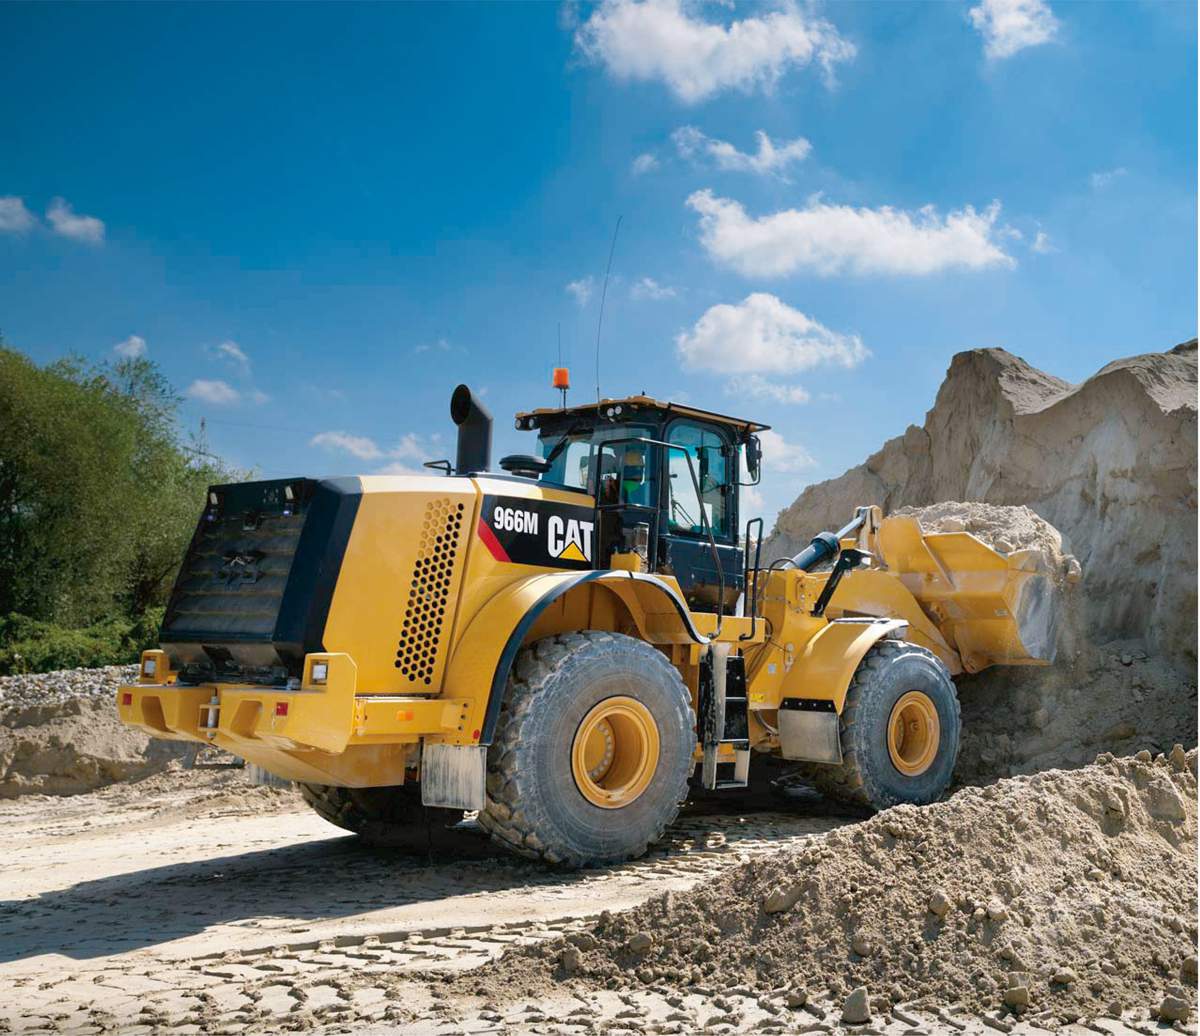 Evolution of the Wheel Loader - From Modified Tractors to Technological Titans